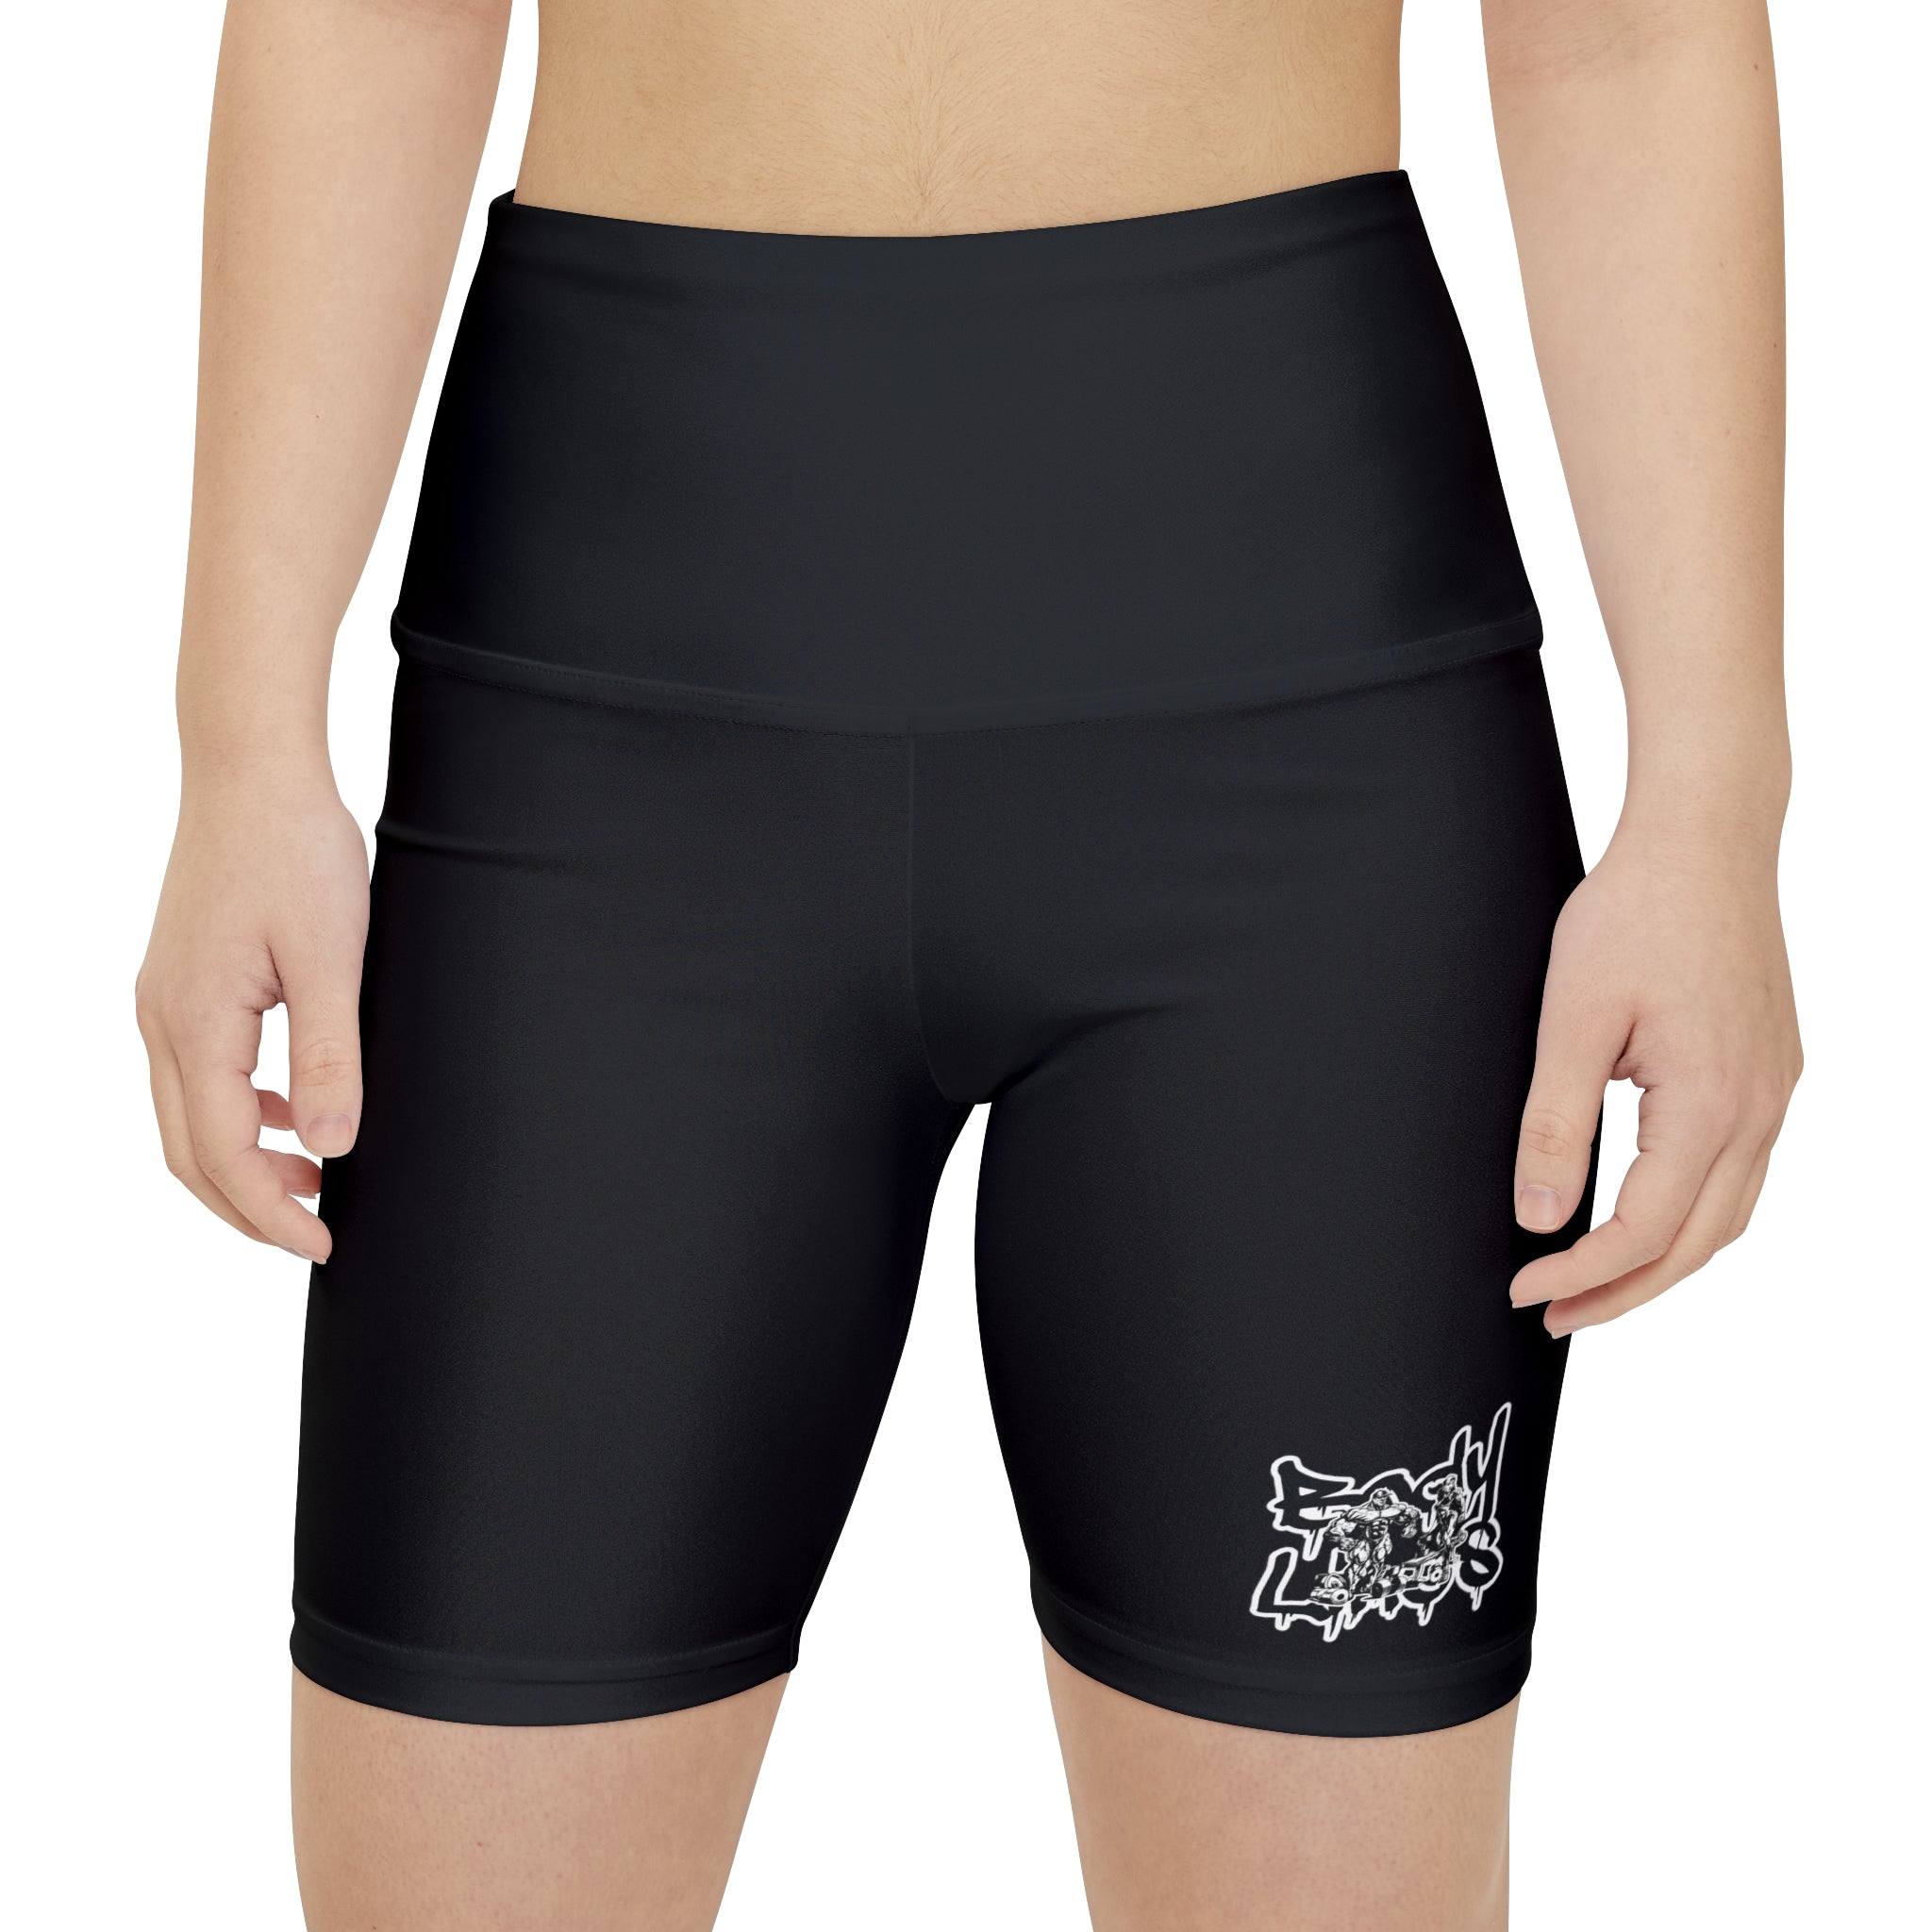 Body Lines - Women's Workout Shorts